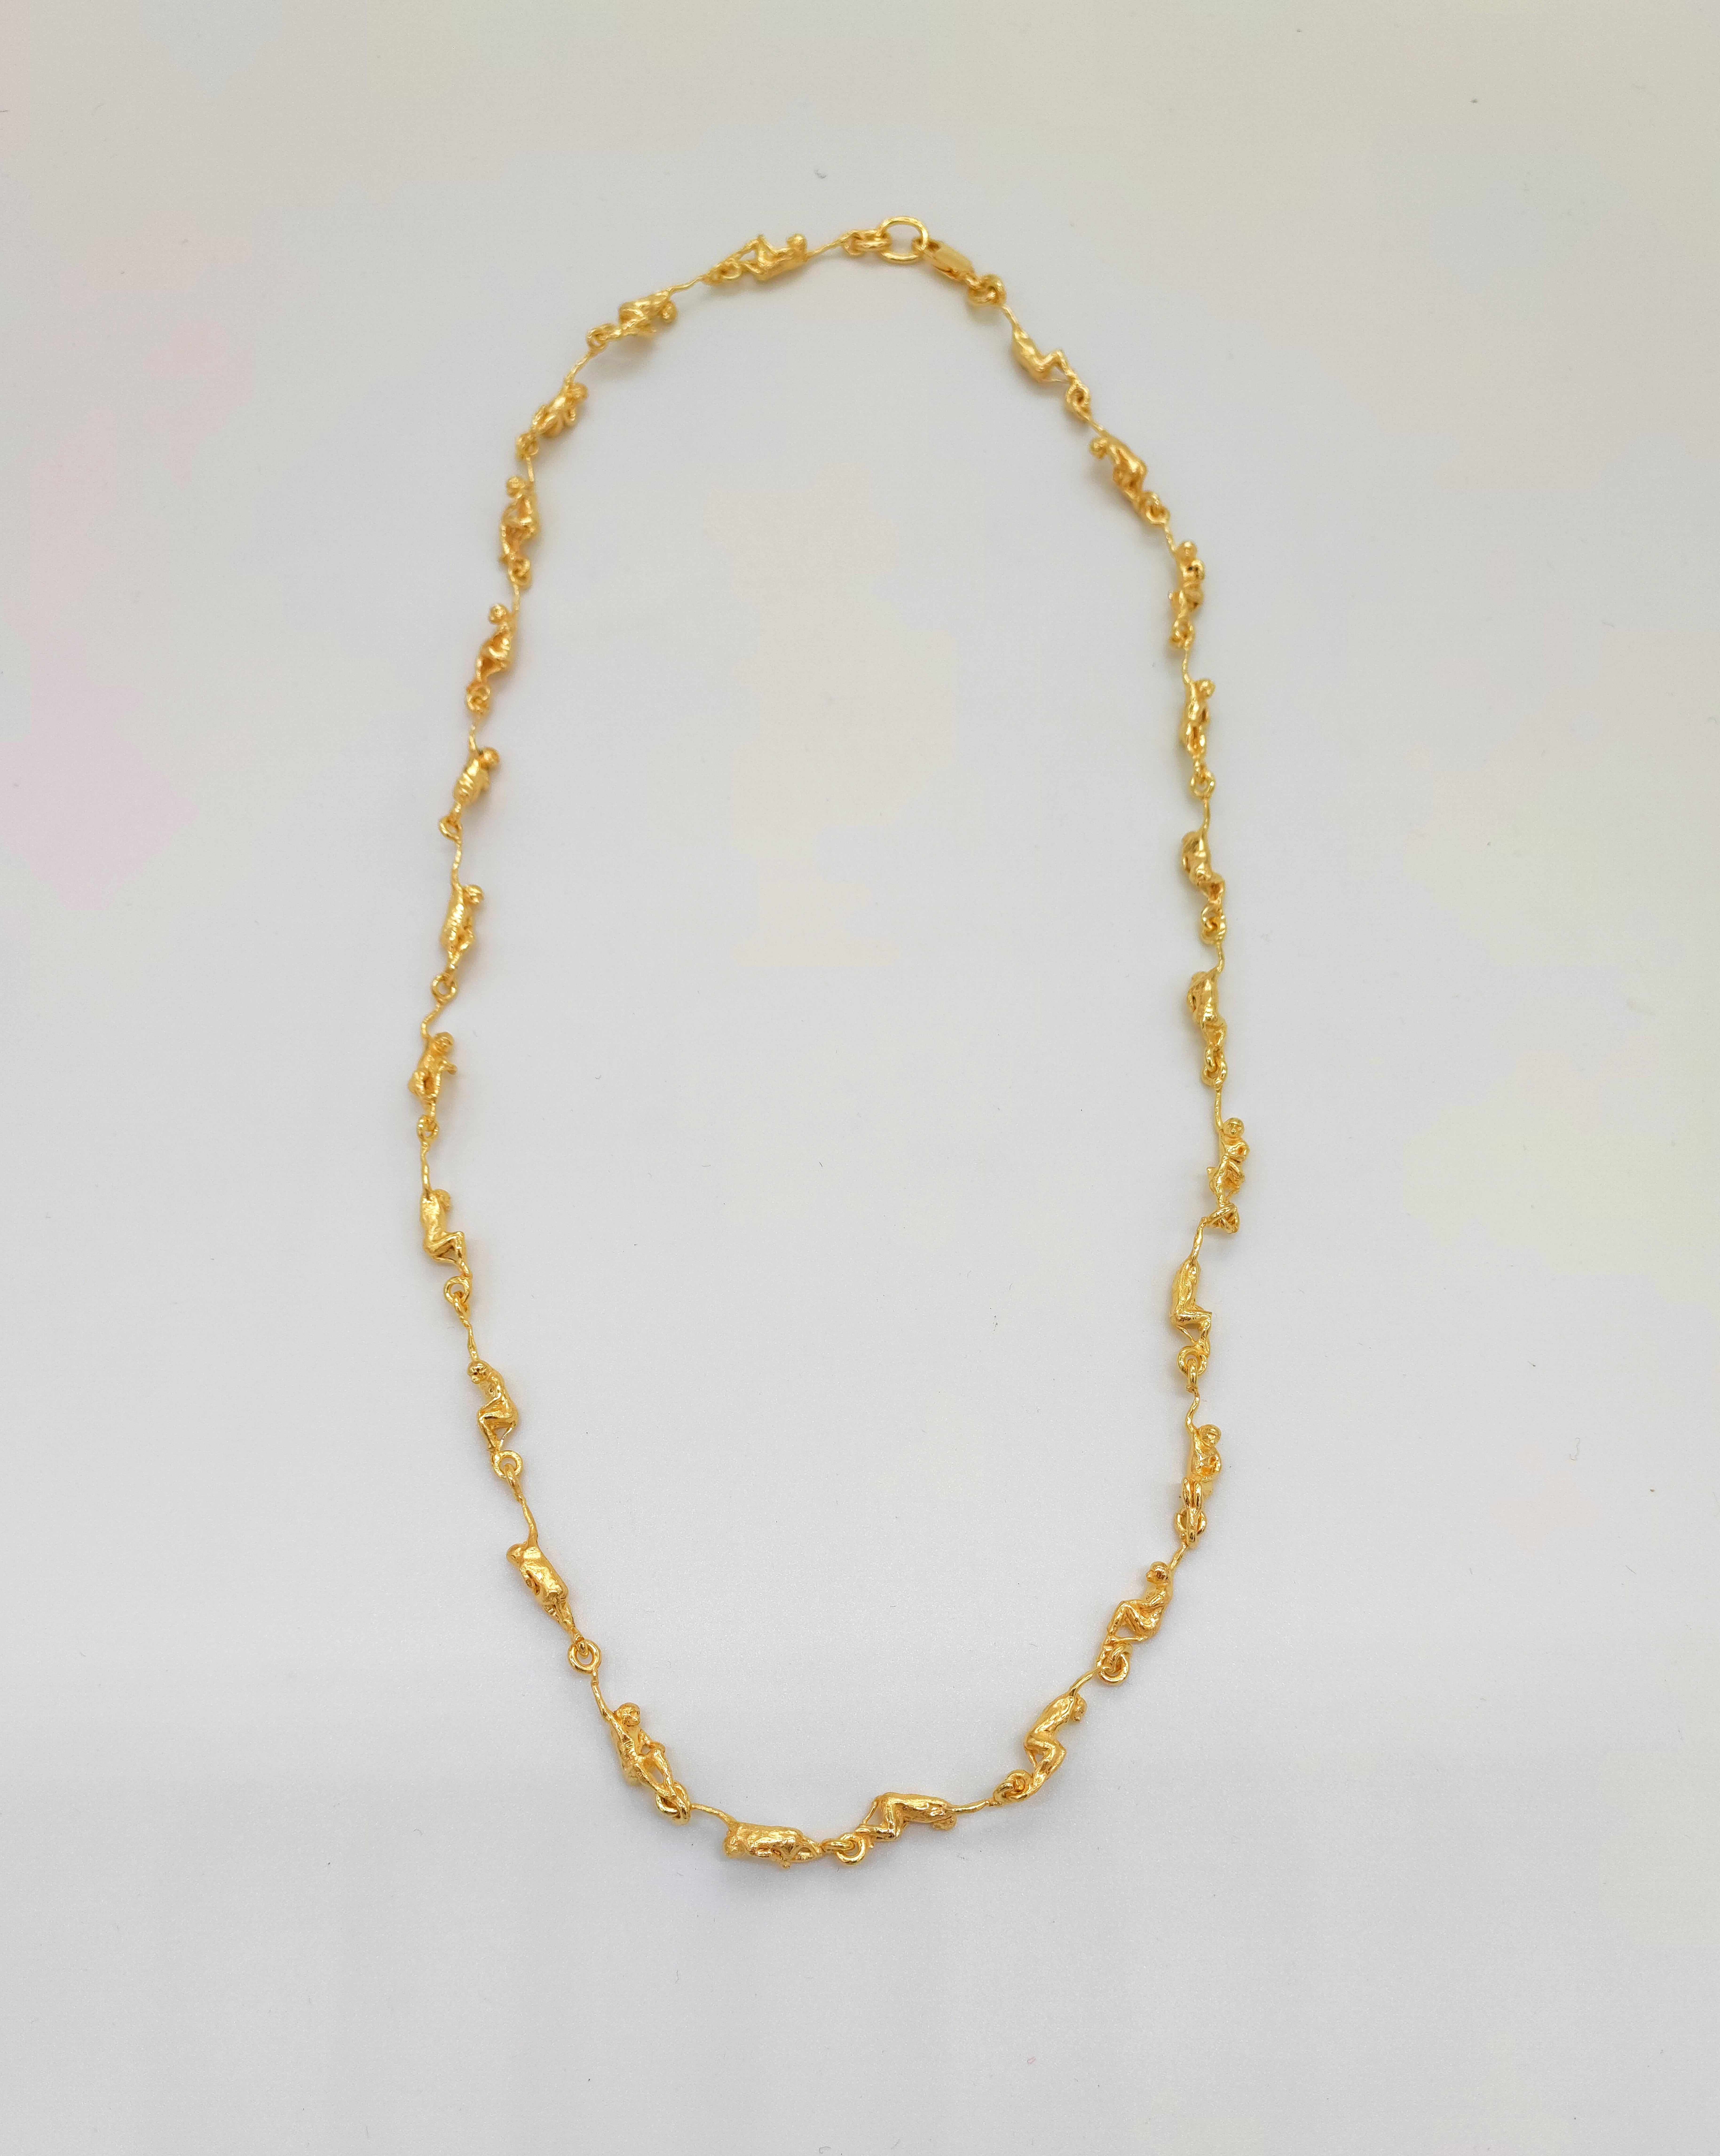 Important 14 kt solid yellow gold choker necklace.
Necklace created entirely by hand by Italian artisans.
The technique is that of lost-wax microsculpture.
Small golden monkeys follow each other and hook each other so as to create an original and